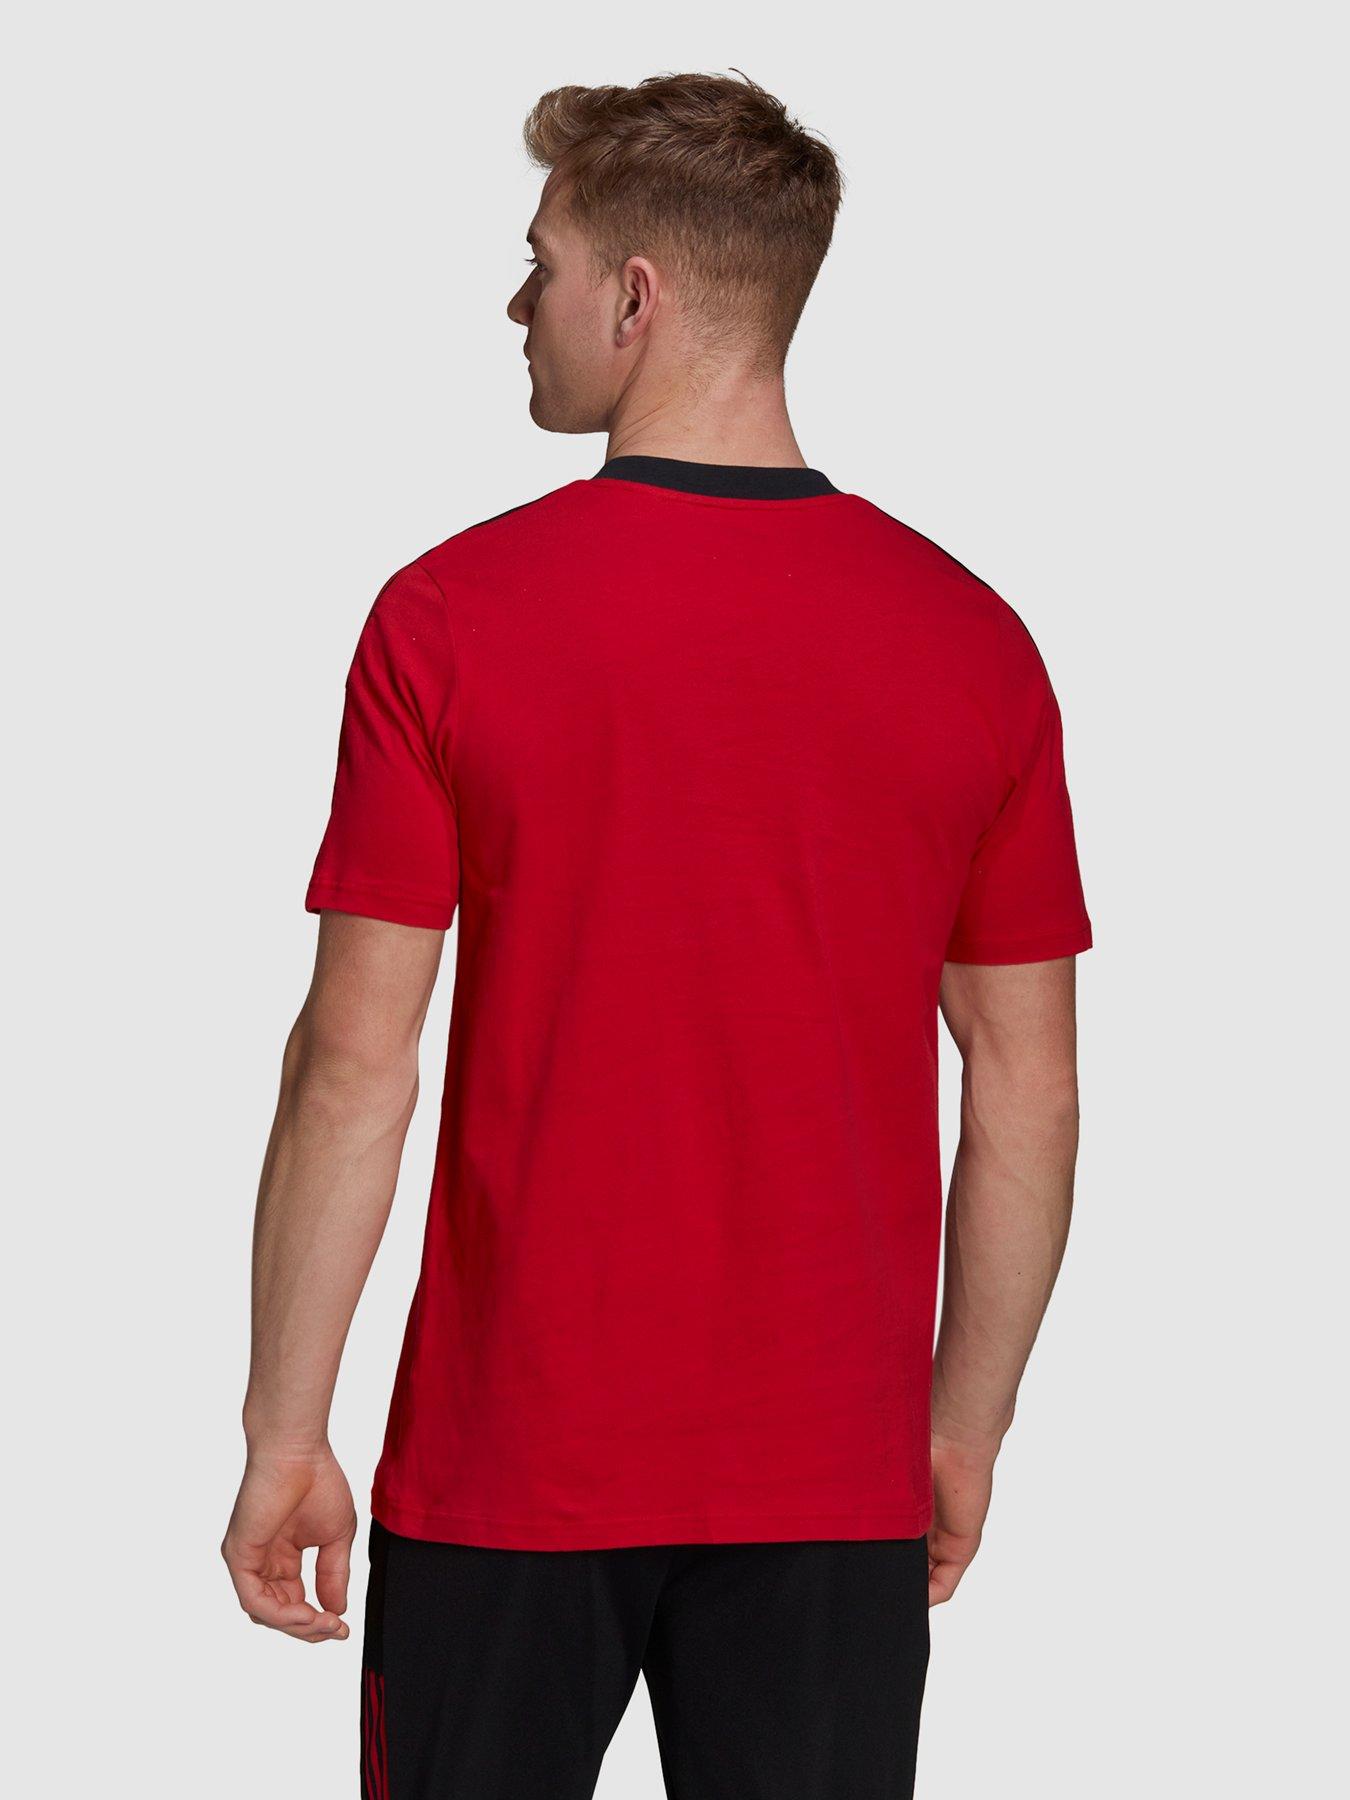 Men 21/22 Manchester United Training Tee - Red